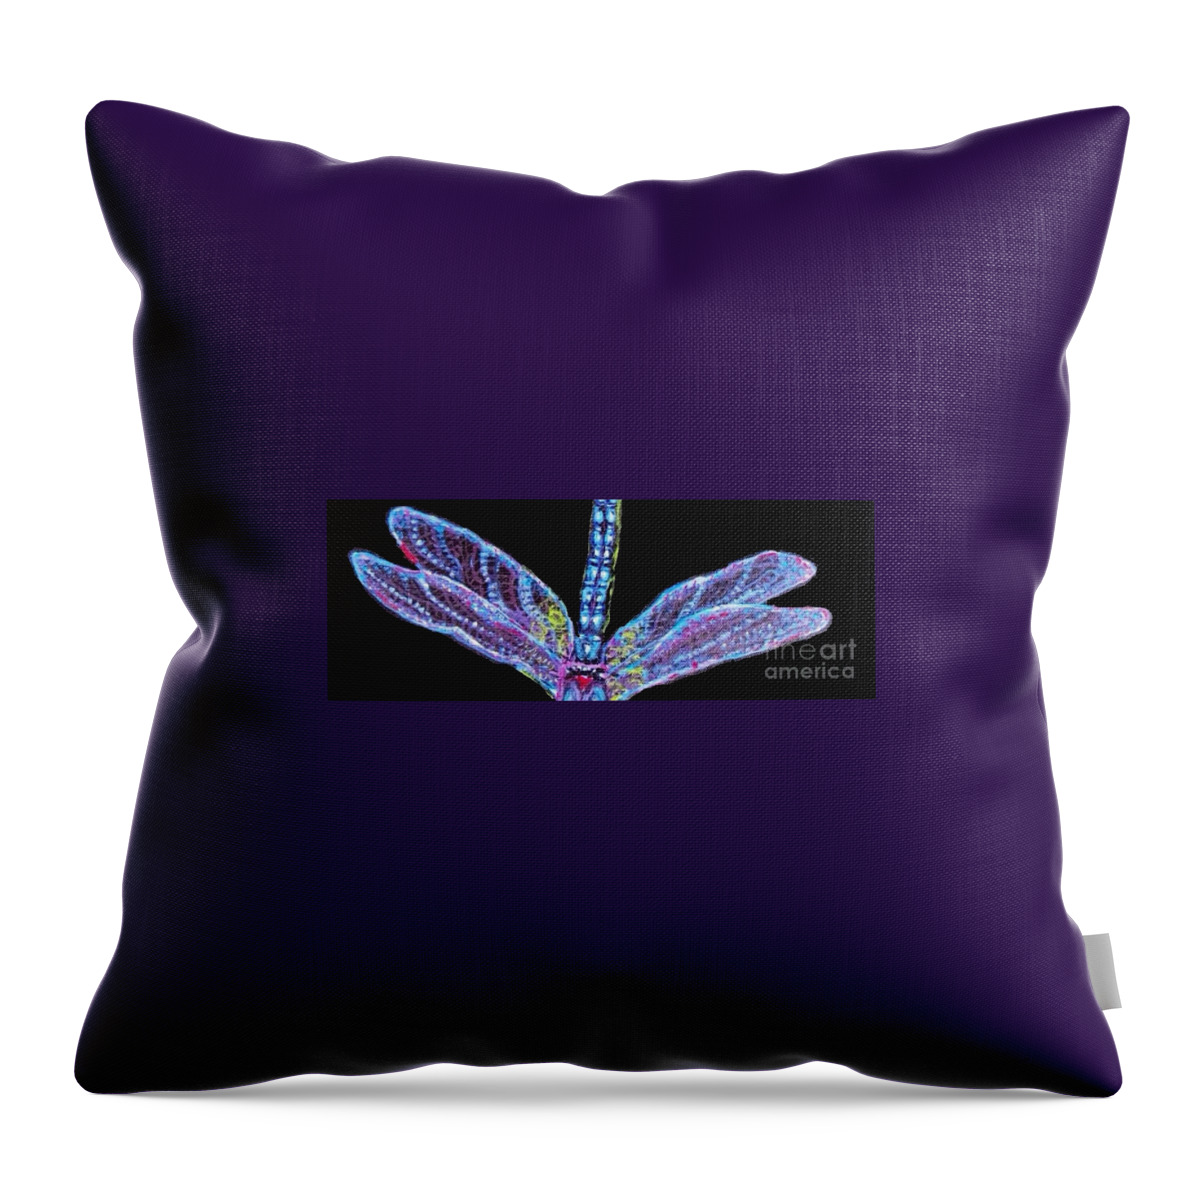 Nature Paintings Blue Dragonfly Paintings With Black Background Blue Ethereal Looking Wings Of A Dragonfly Illuminated Acrylic Paintings Throw Pillow featuring the painting Ethereal Wings of Blue by Kimberlee Baxter